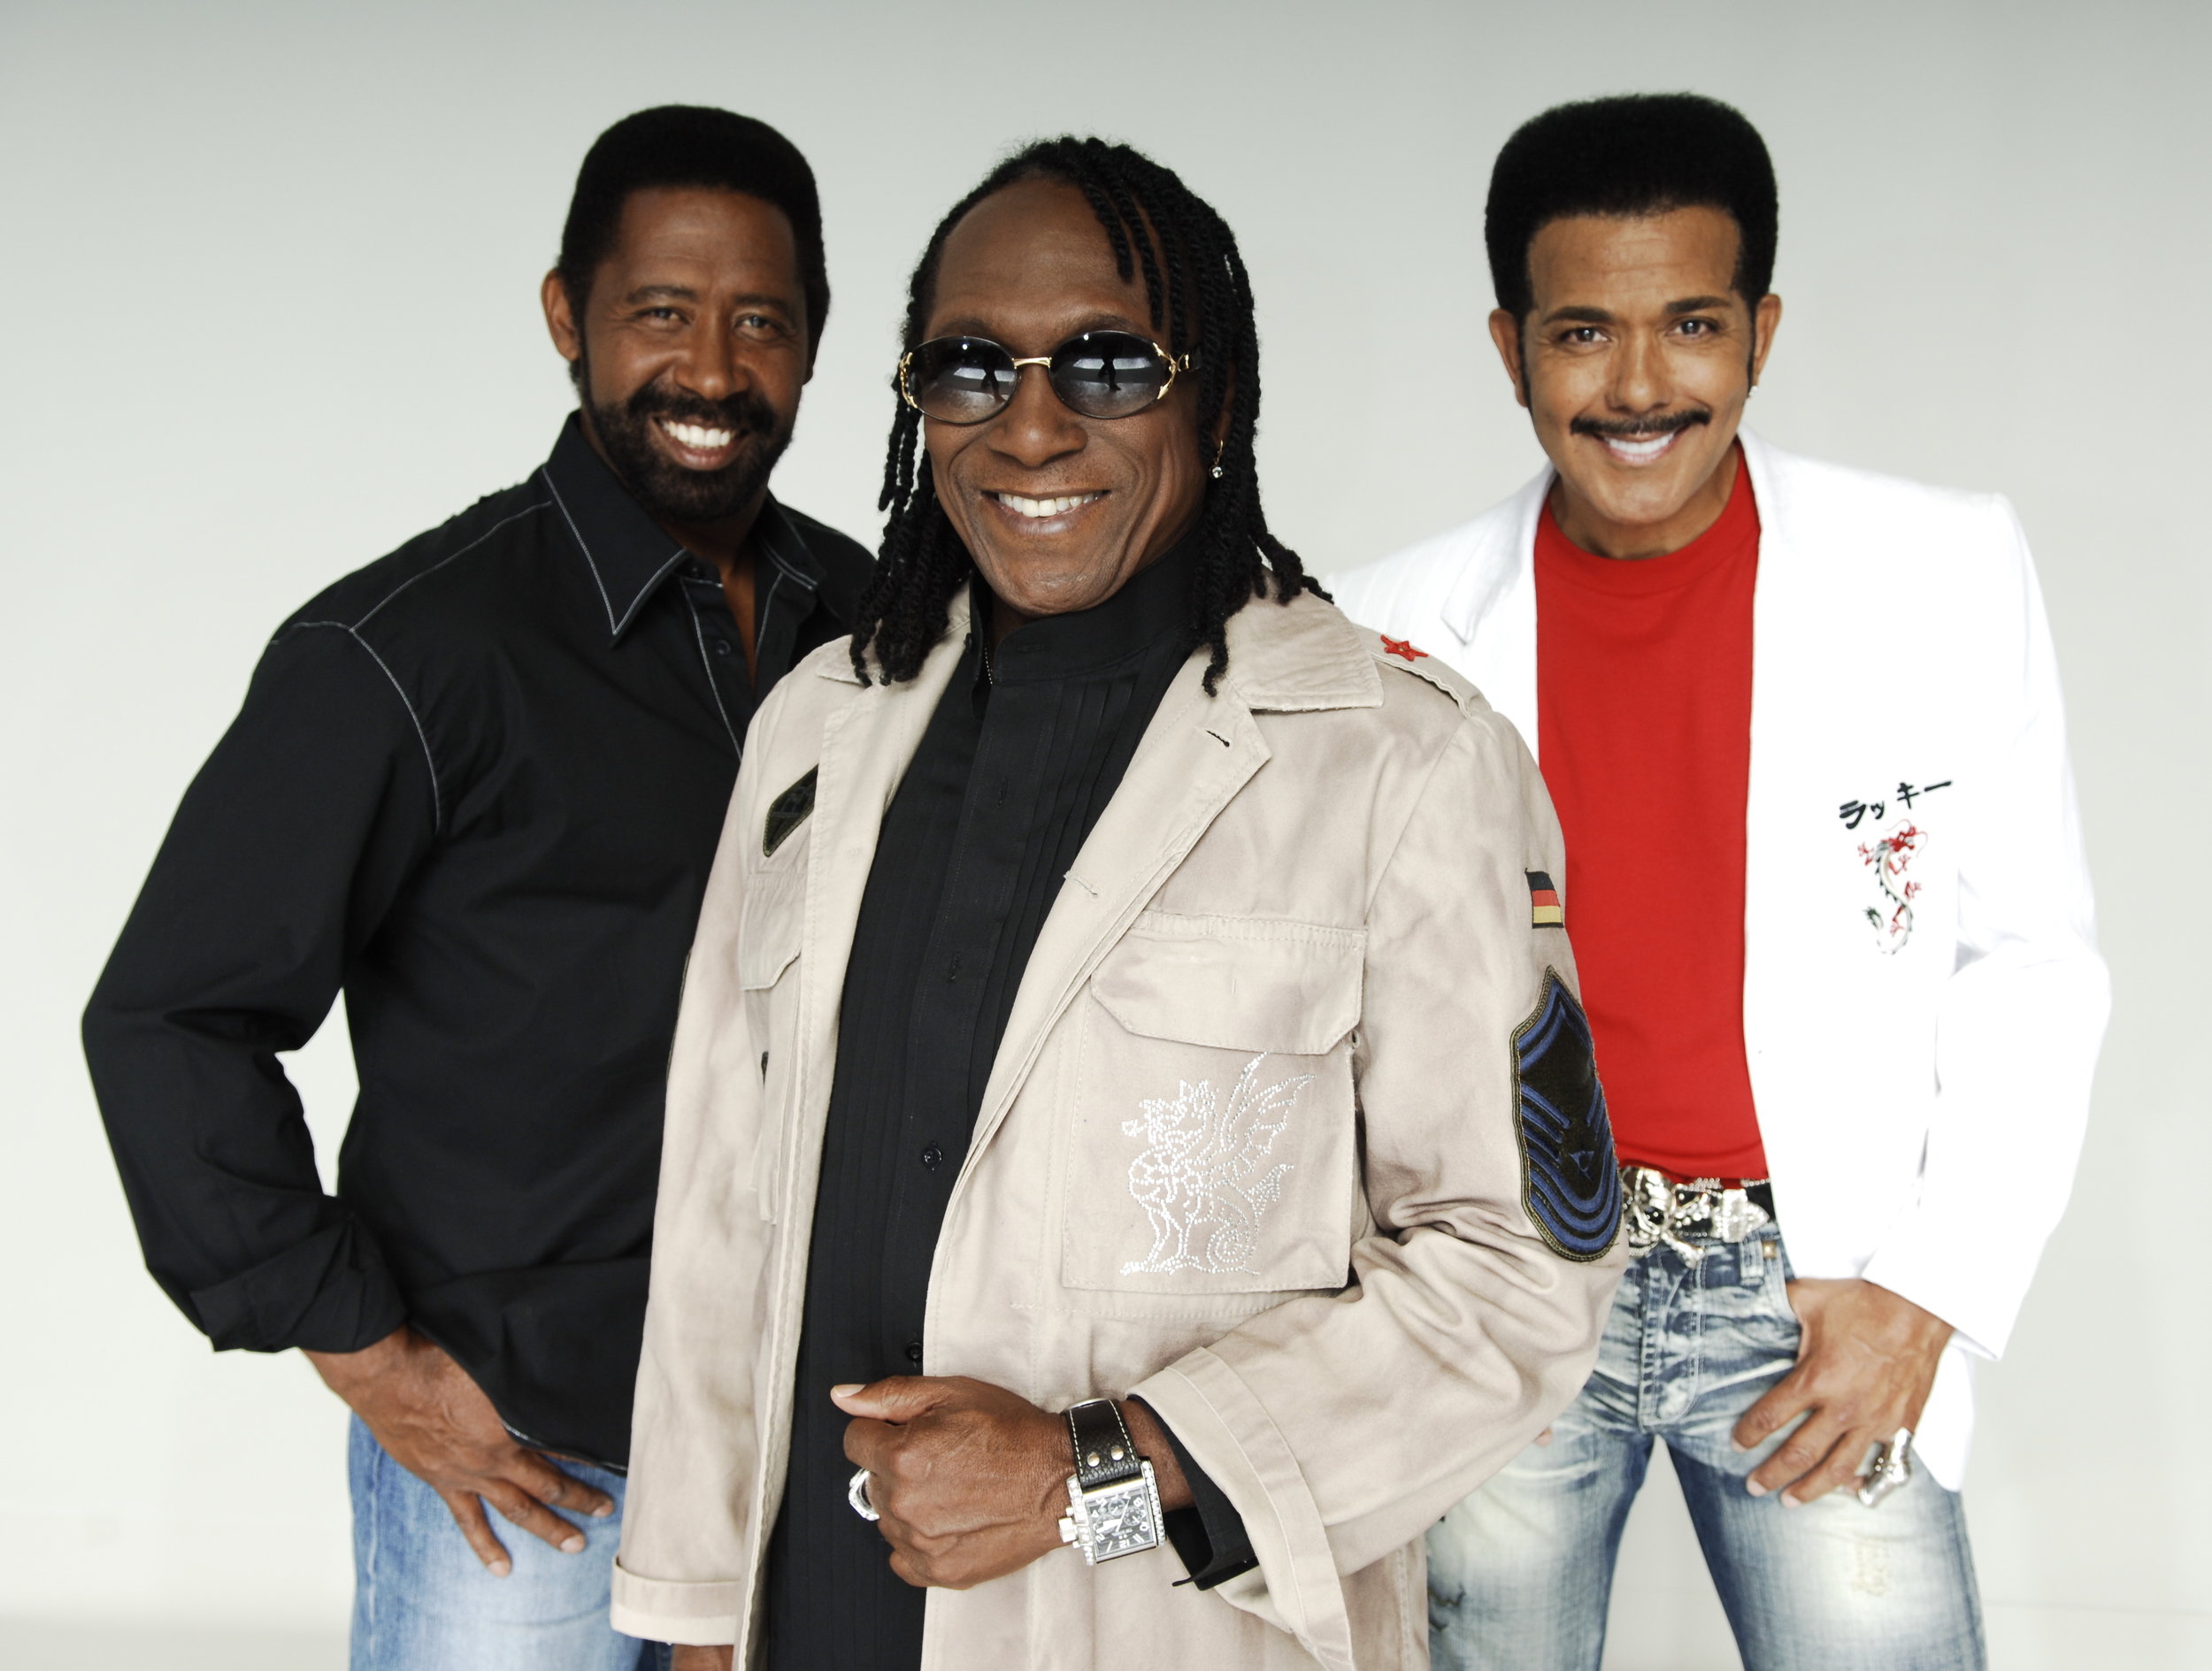 Image of the Commodores